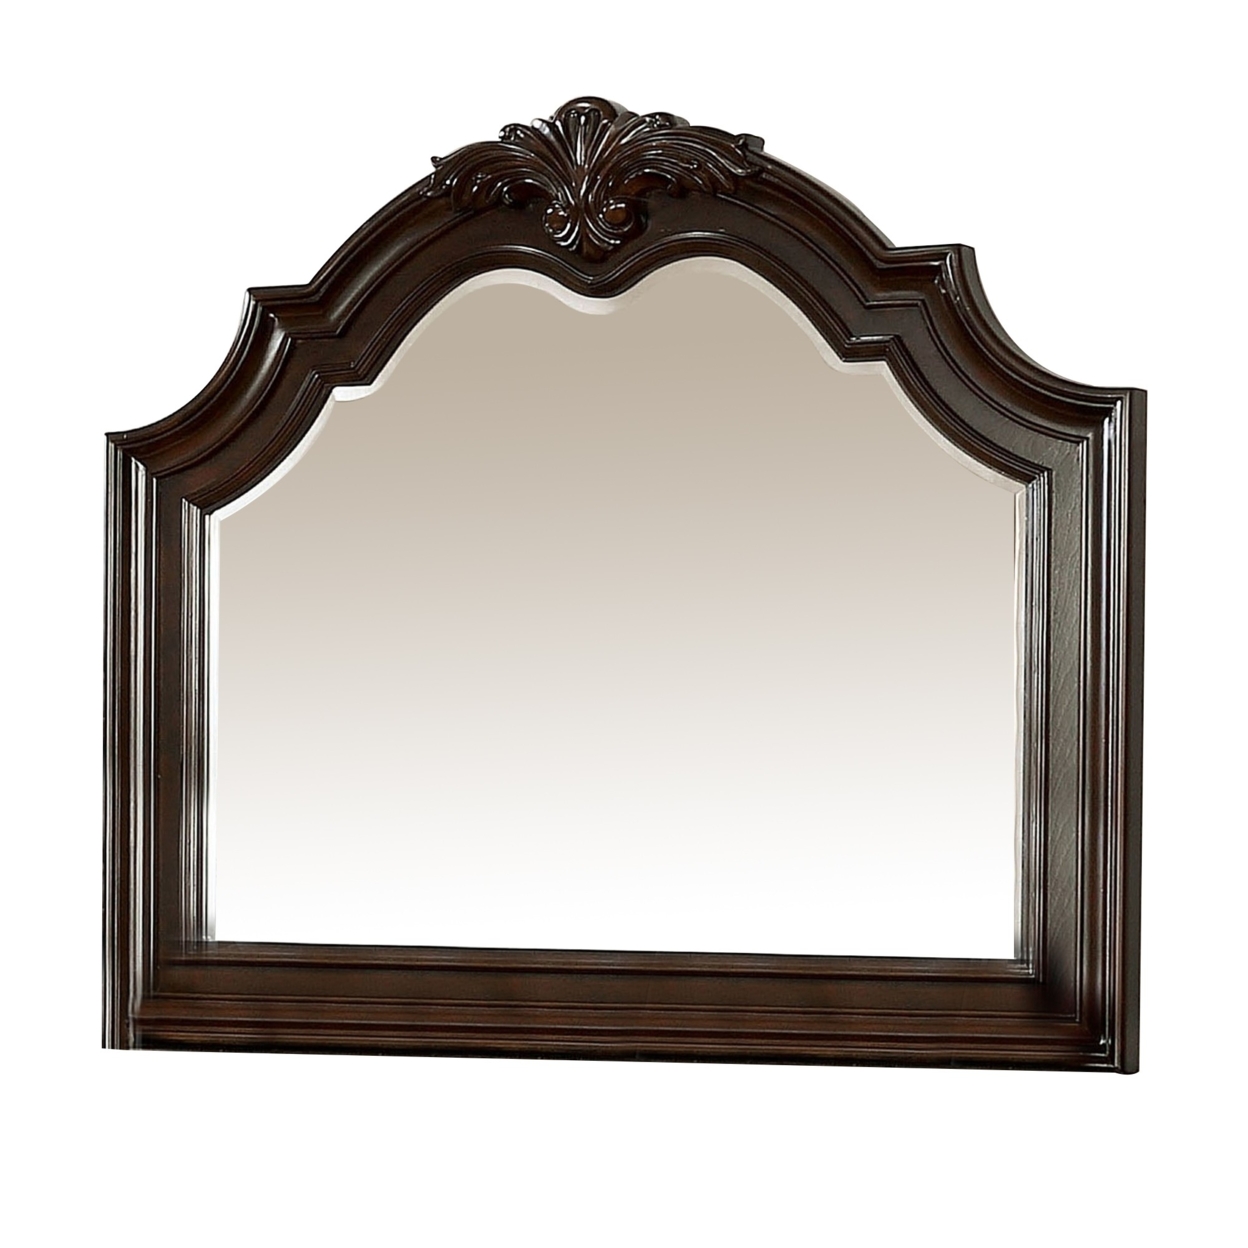 Traditional Style Mirror With Carved Details And Crown Top, Brown- Saltoro Sherpi